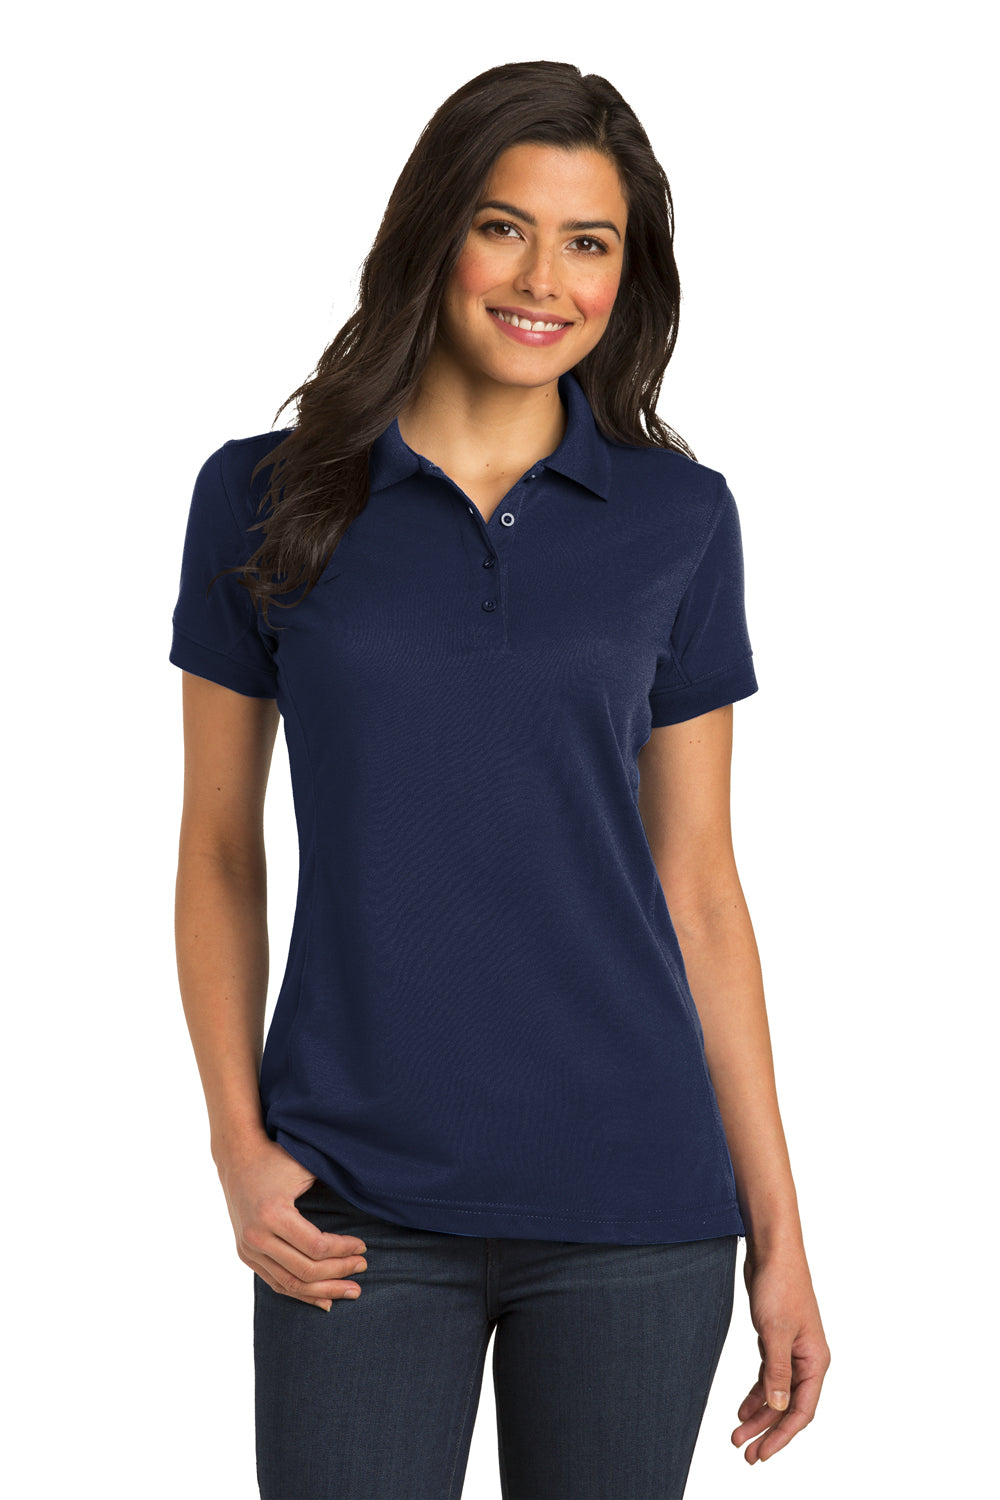 Port Authority L567 Womens 5-in-1 Performance Moisture Wicking Short Sleeve Polo Shirt Navy Blue Front